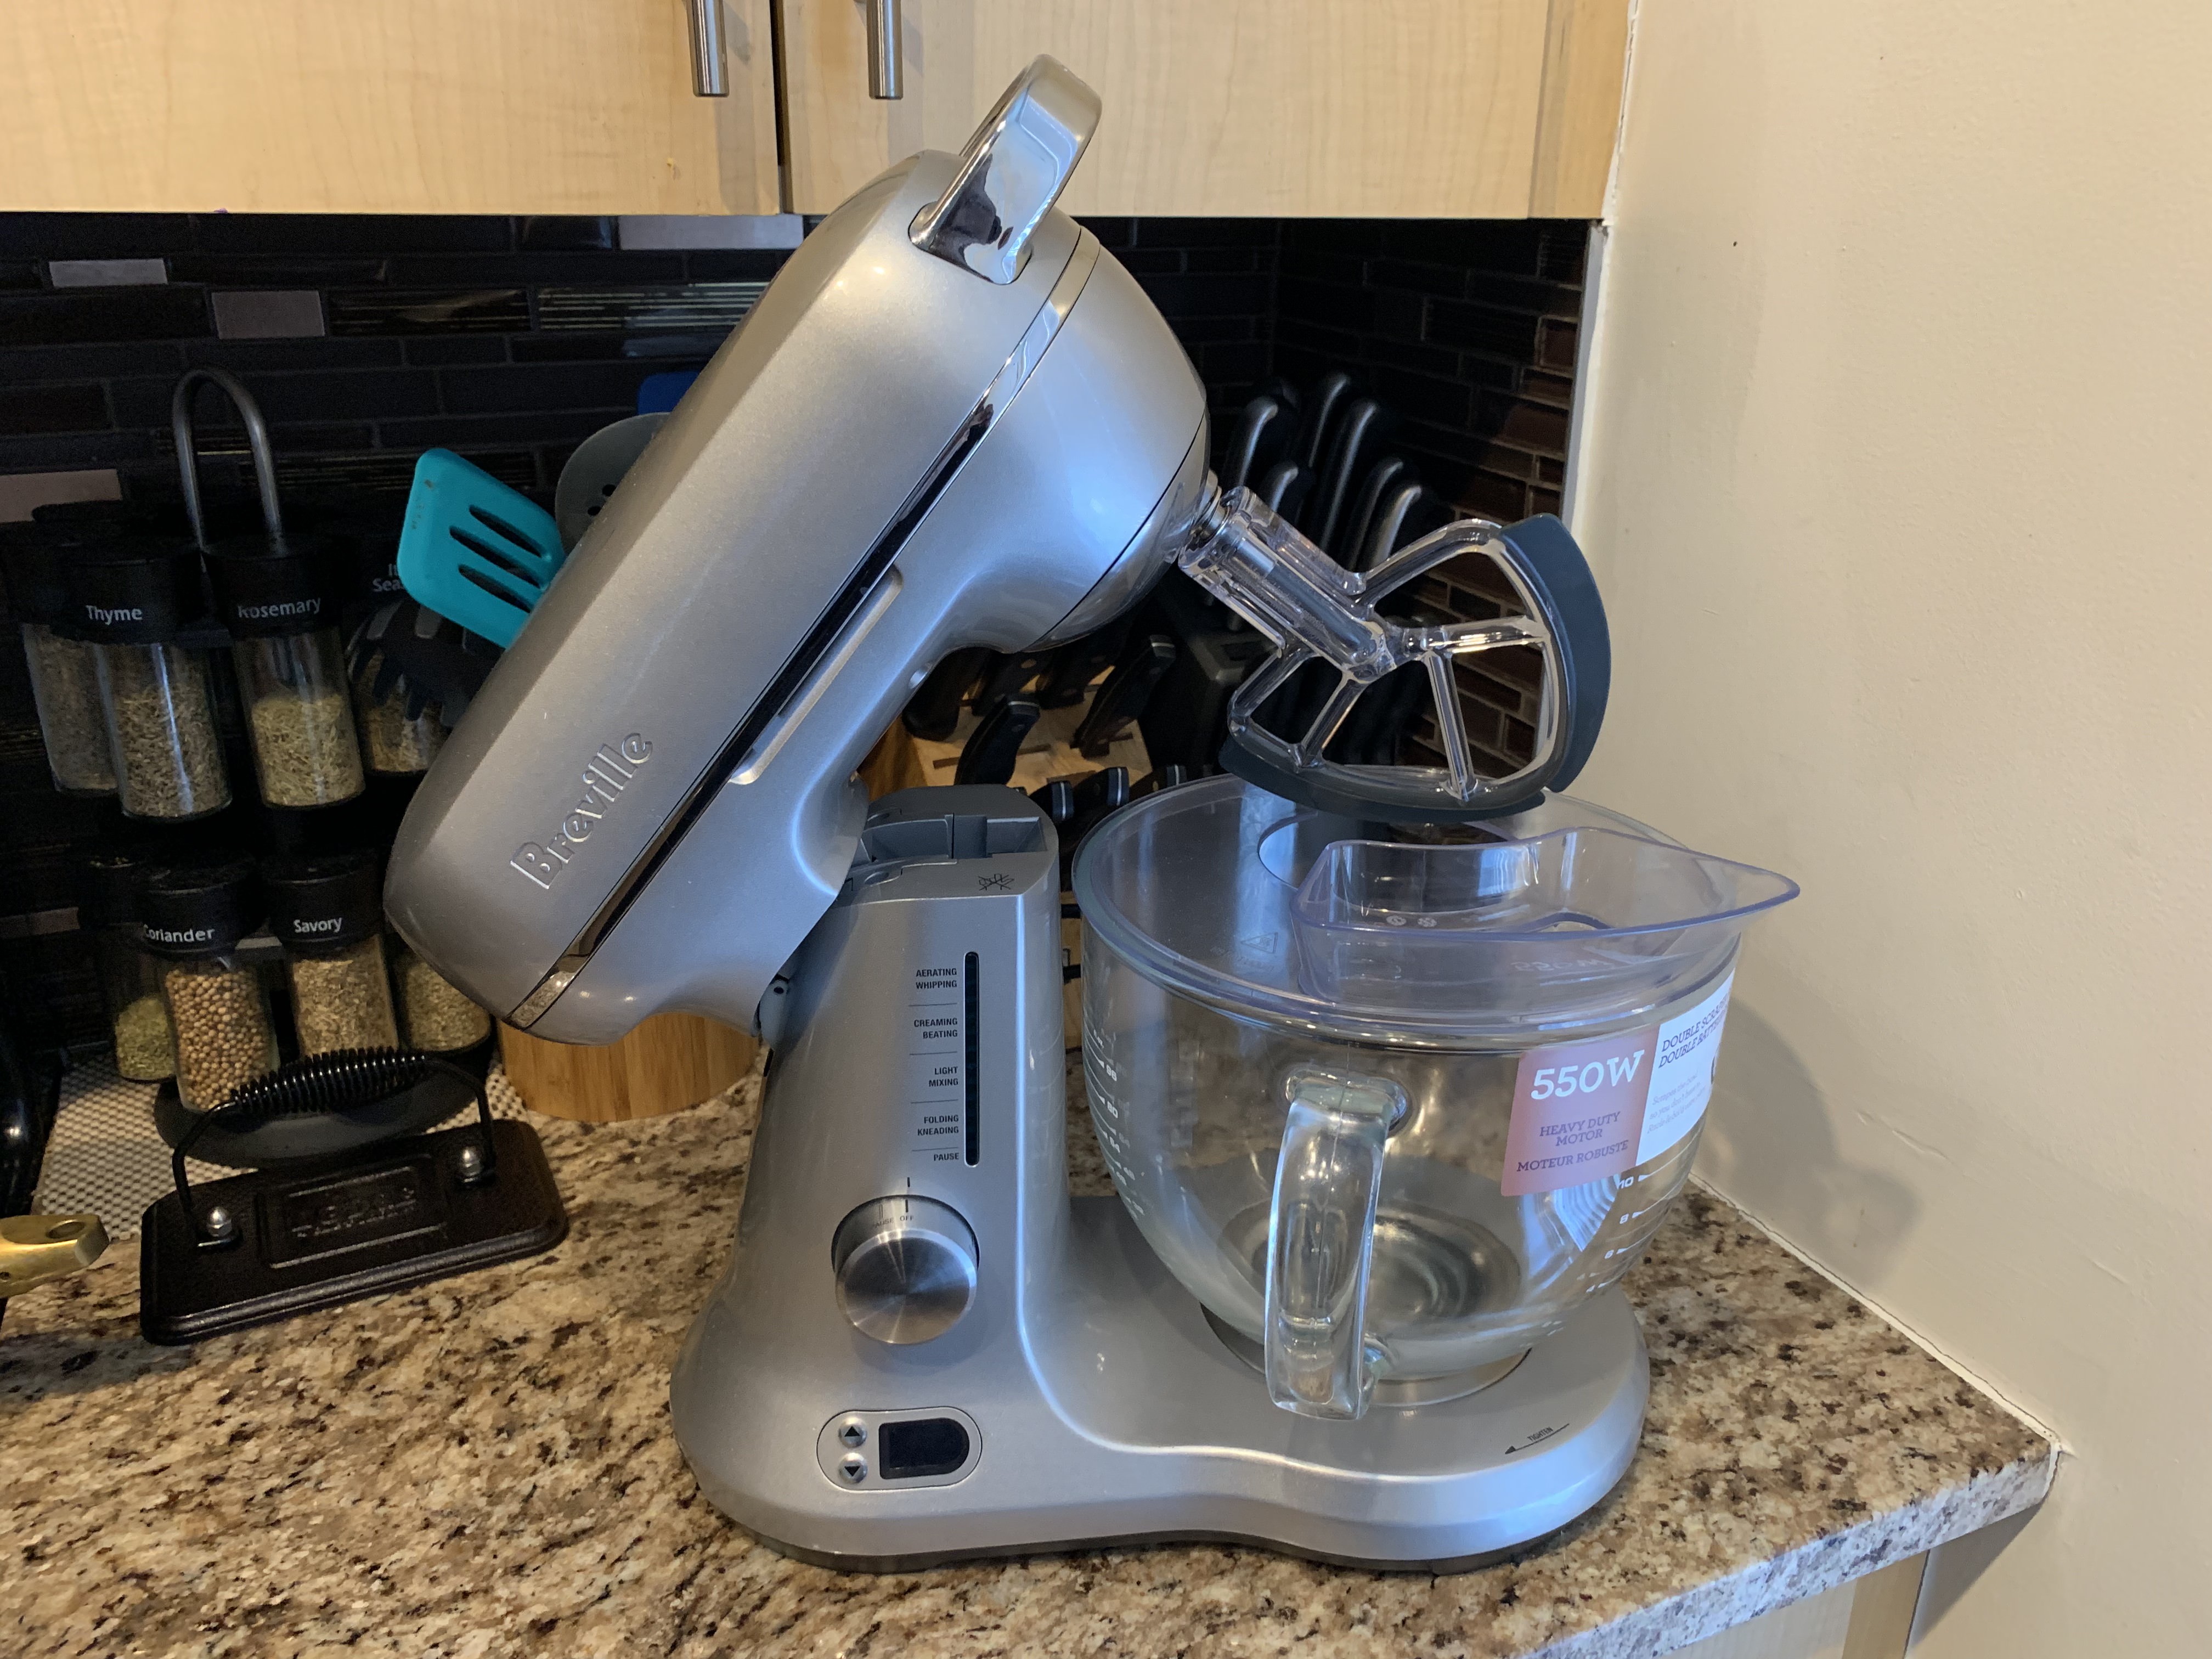 Breville Bakery Chef Standing Mixer Will Bring Delight to Everyone, Not ...